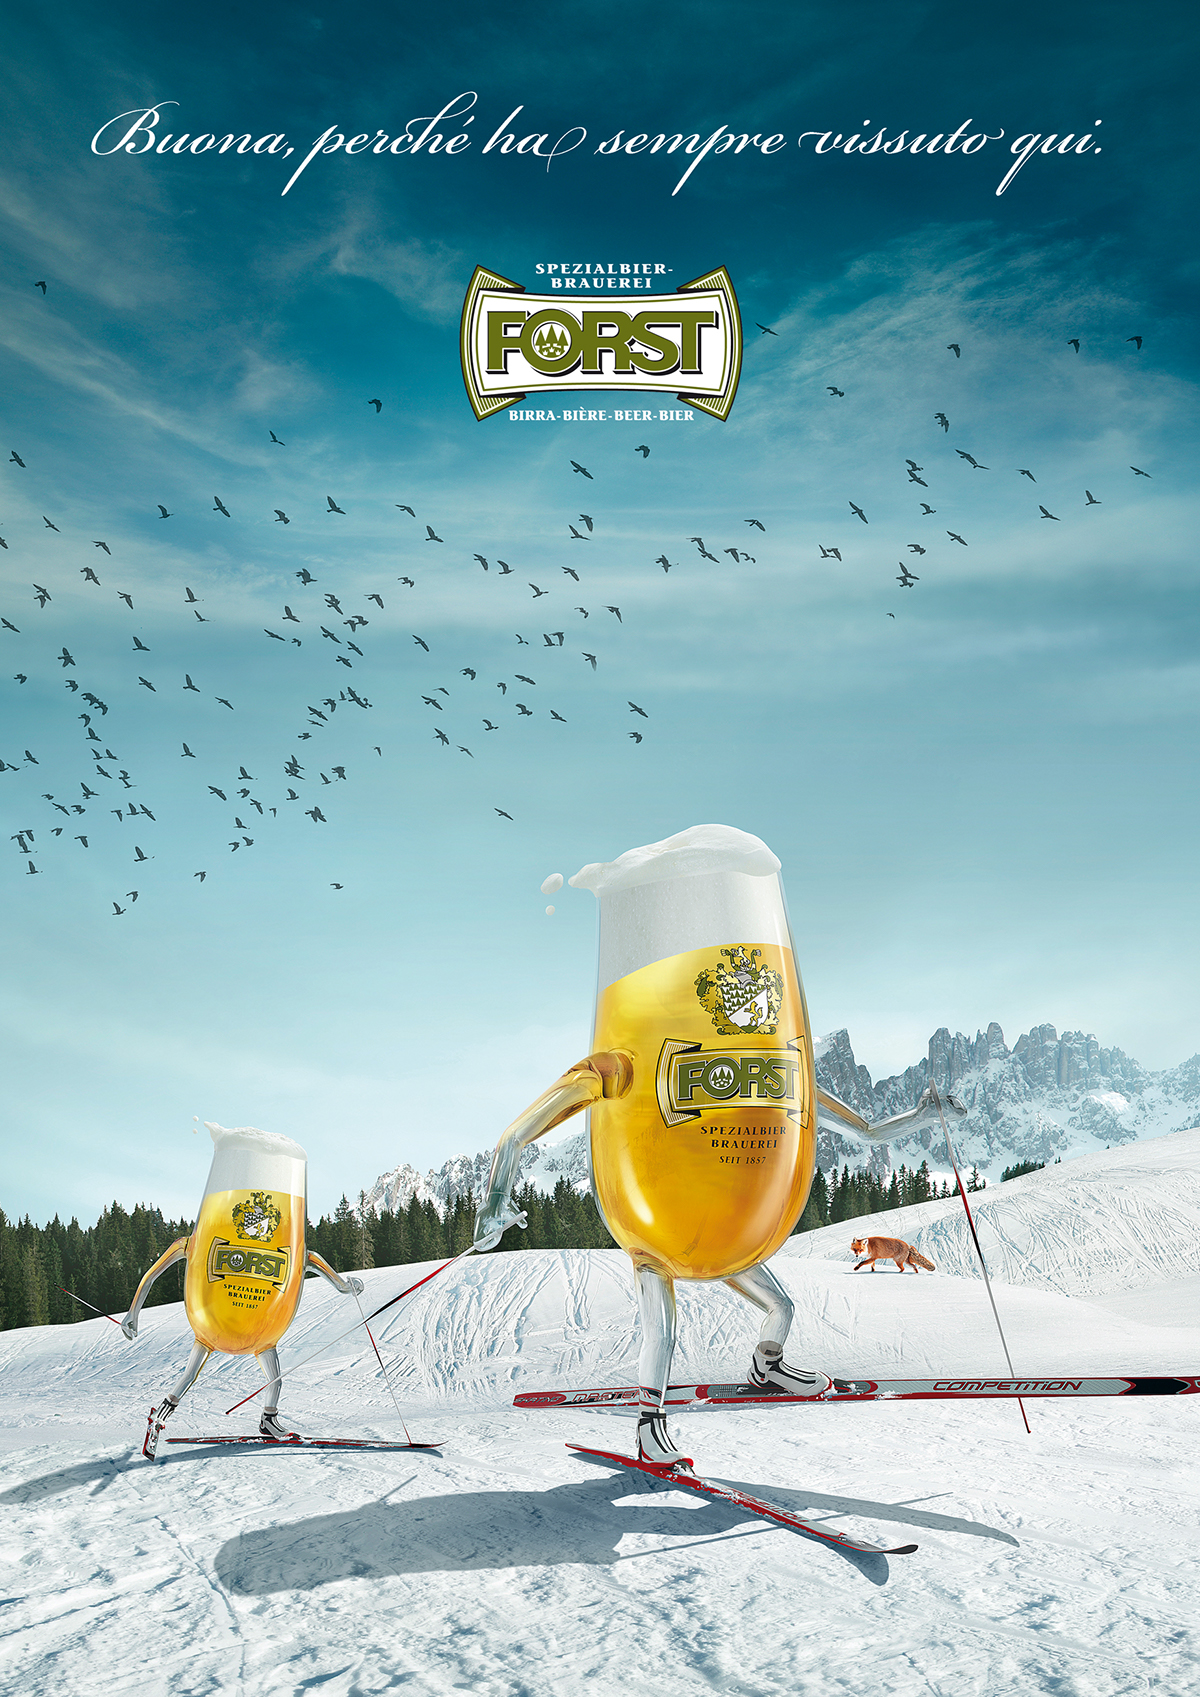 forst beer ADV campaign Nature Good glasses FOX Ski mountains print